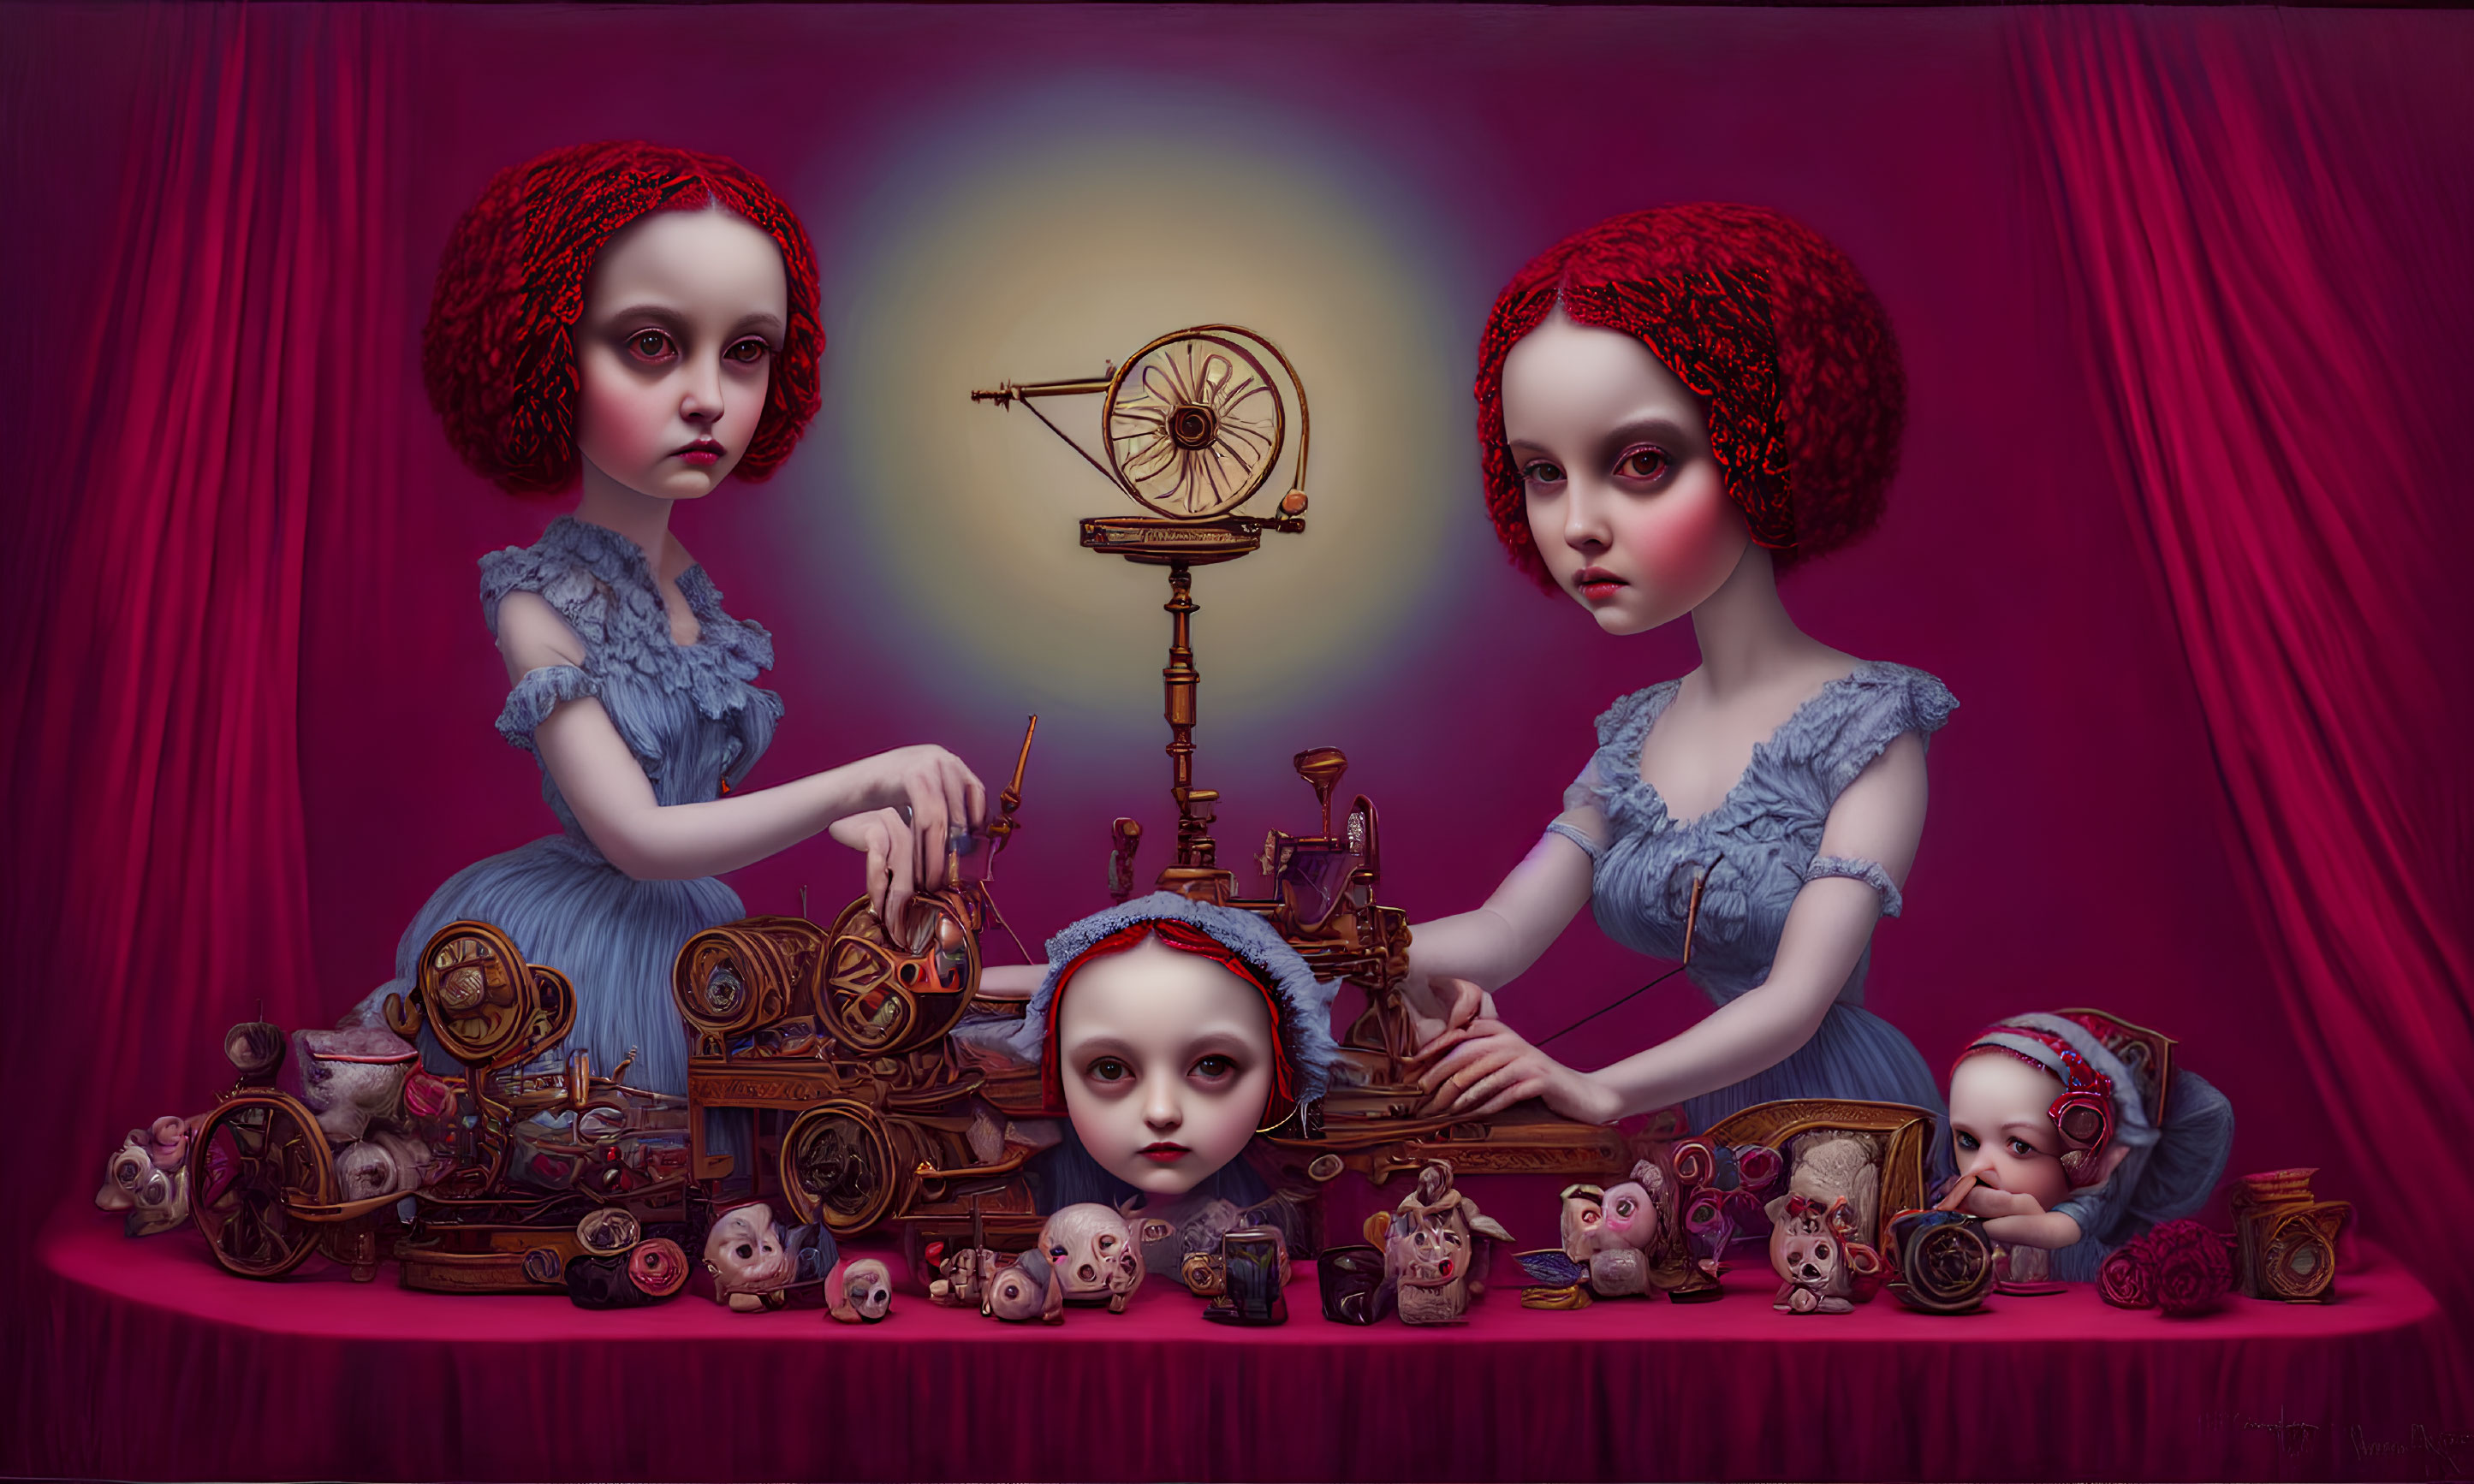 Identical Red-Haired Girls in Blue Dresses Surrounded by Mechanical Objects and Doll Heads